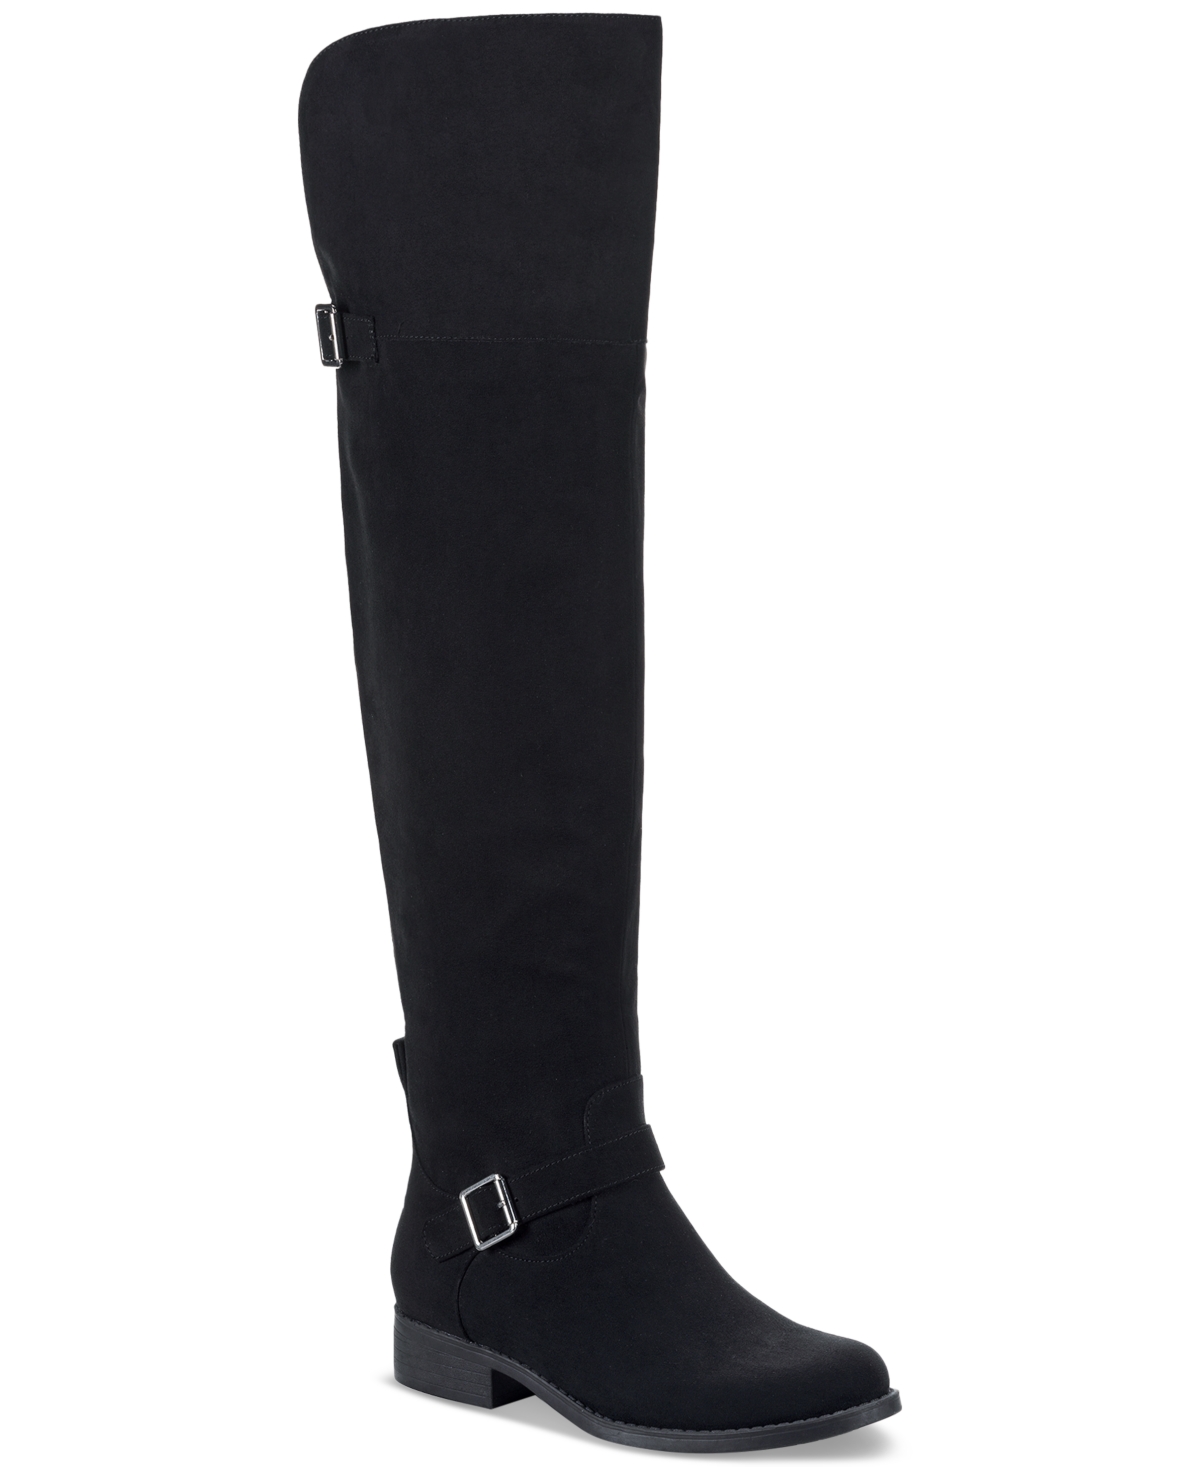 Women's Anyaa Wide-Calf Buckled Over-The-Knee Boots, Created for Macy's - Black